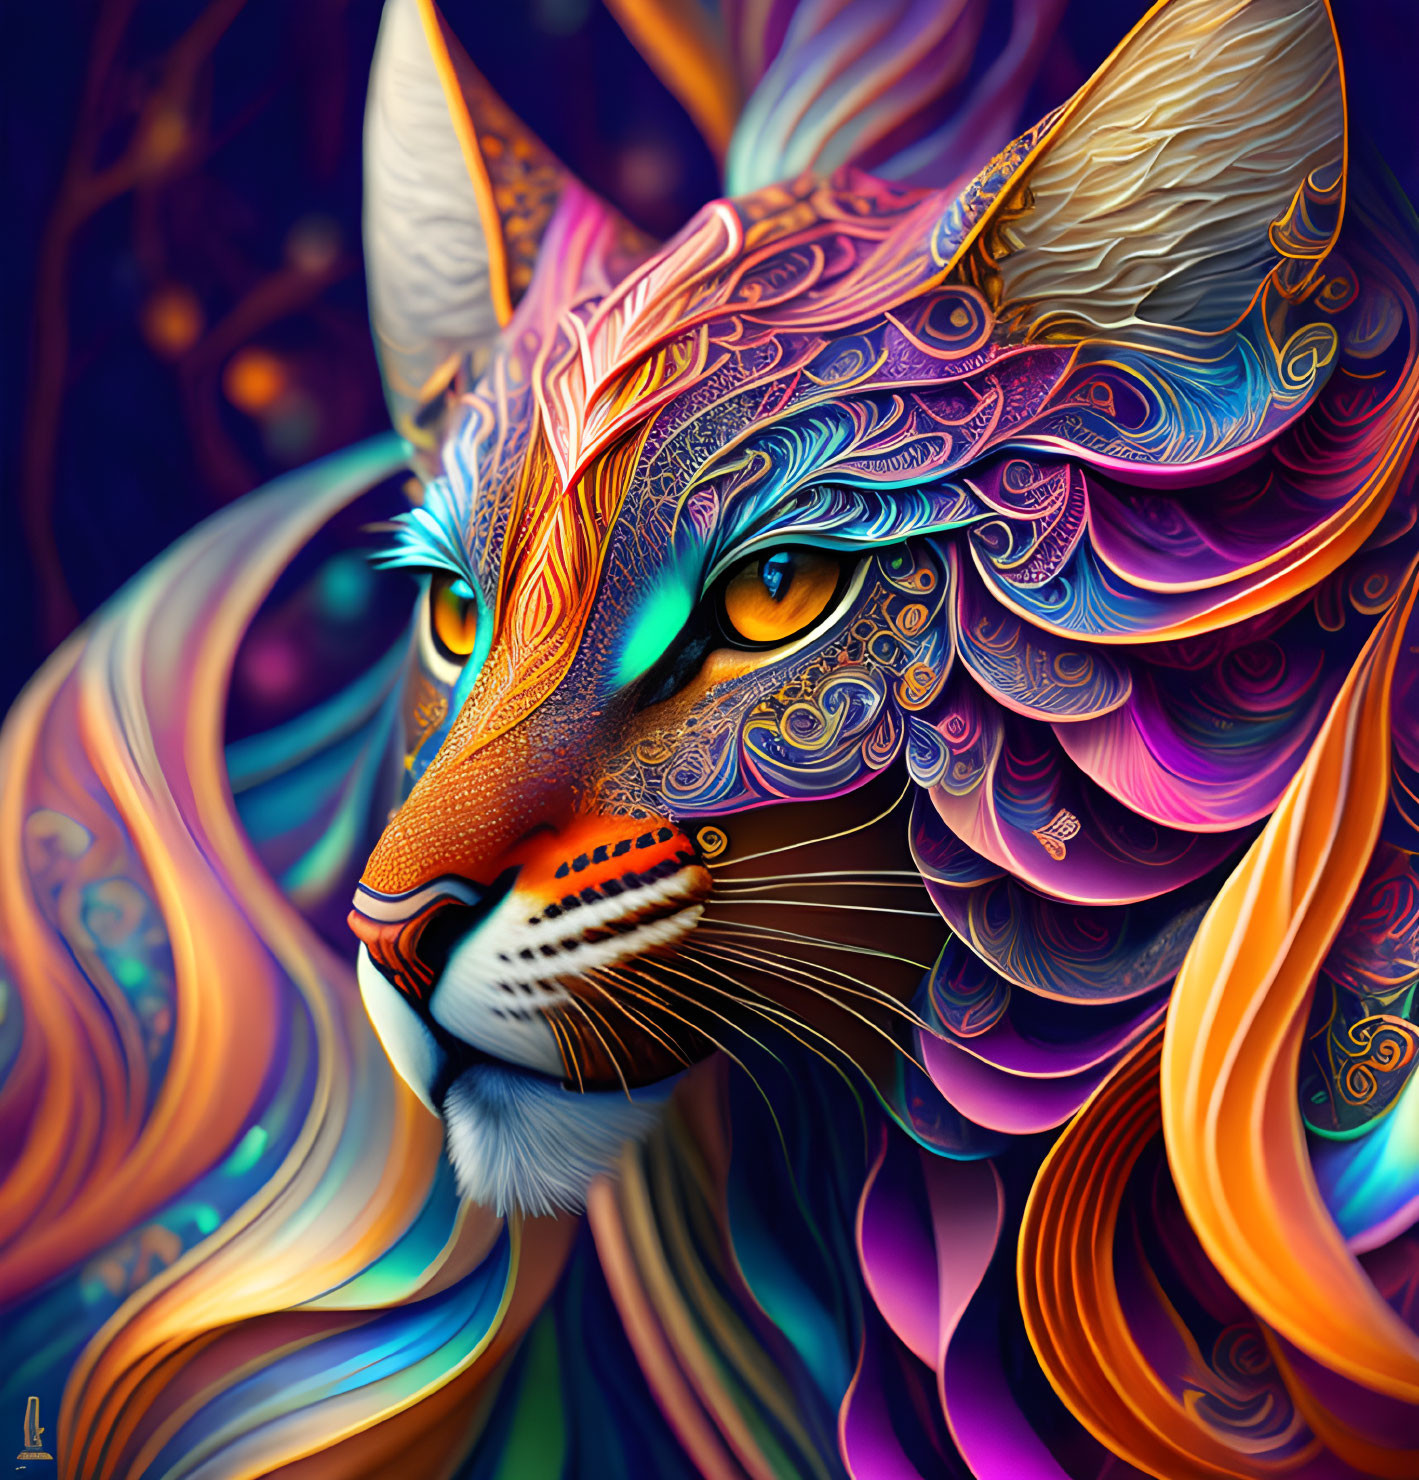 Colorful Stylized Cat Artwork with Intricate Patterns in Blue, Orange, and Purple